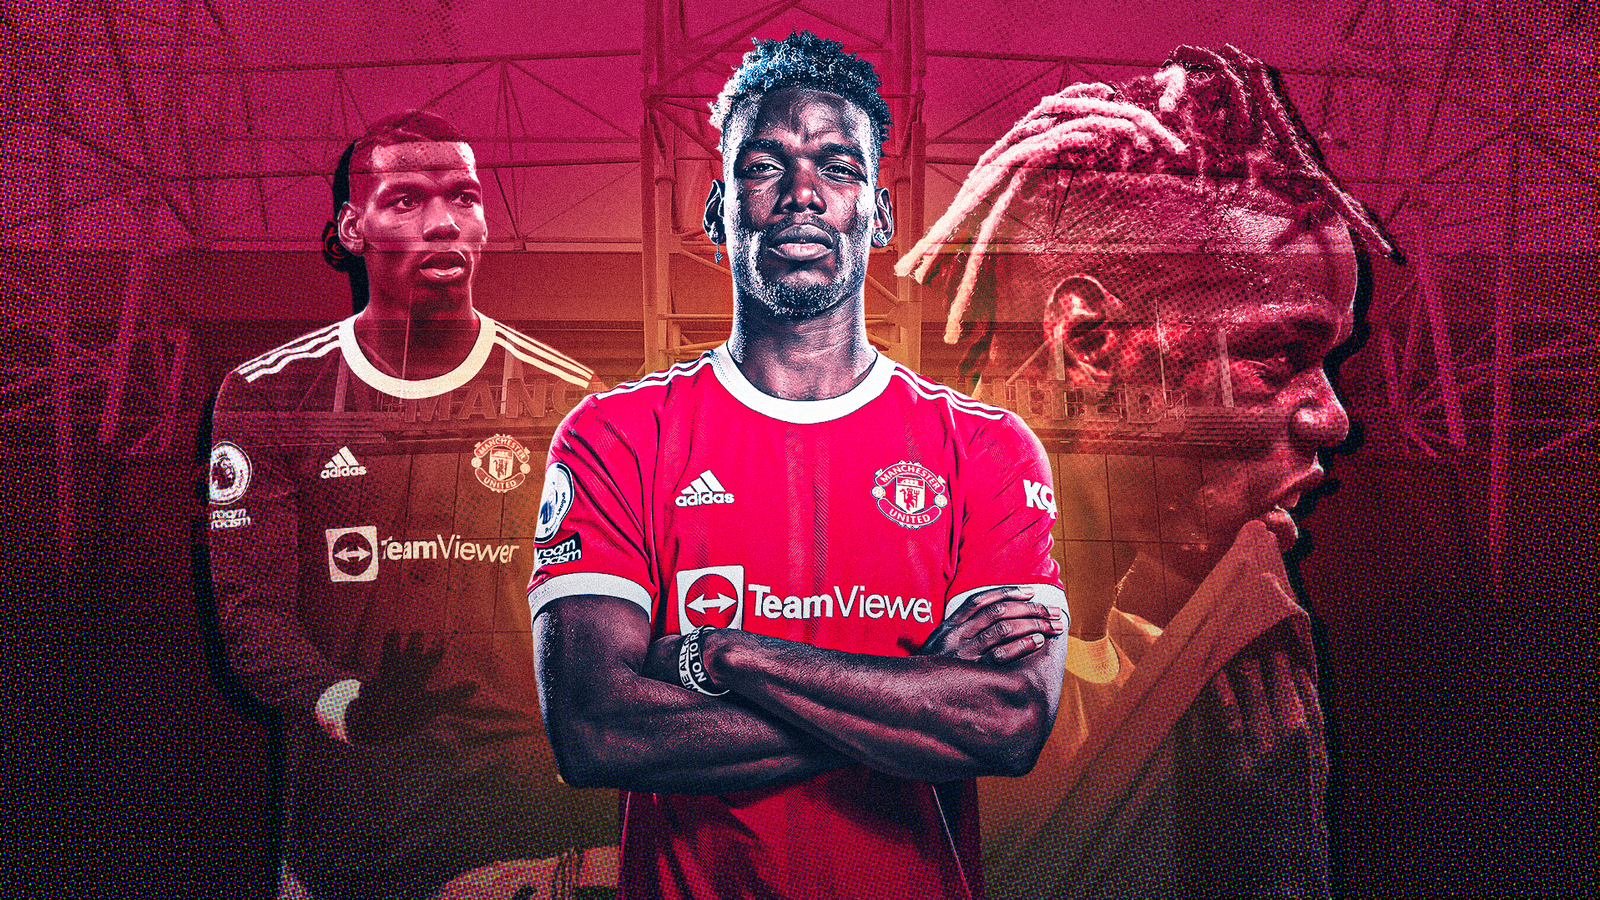 Paul Pogba Fc Manchester United Wallpapers